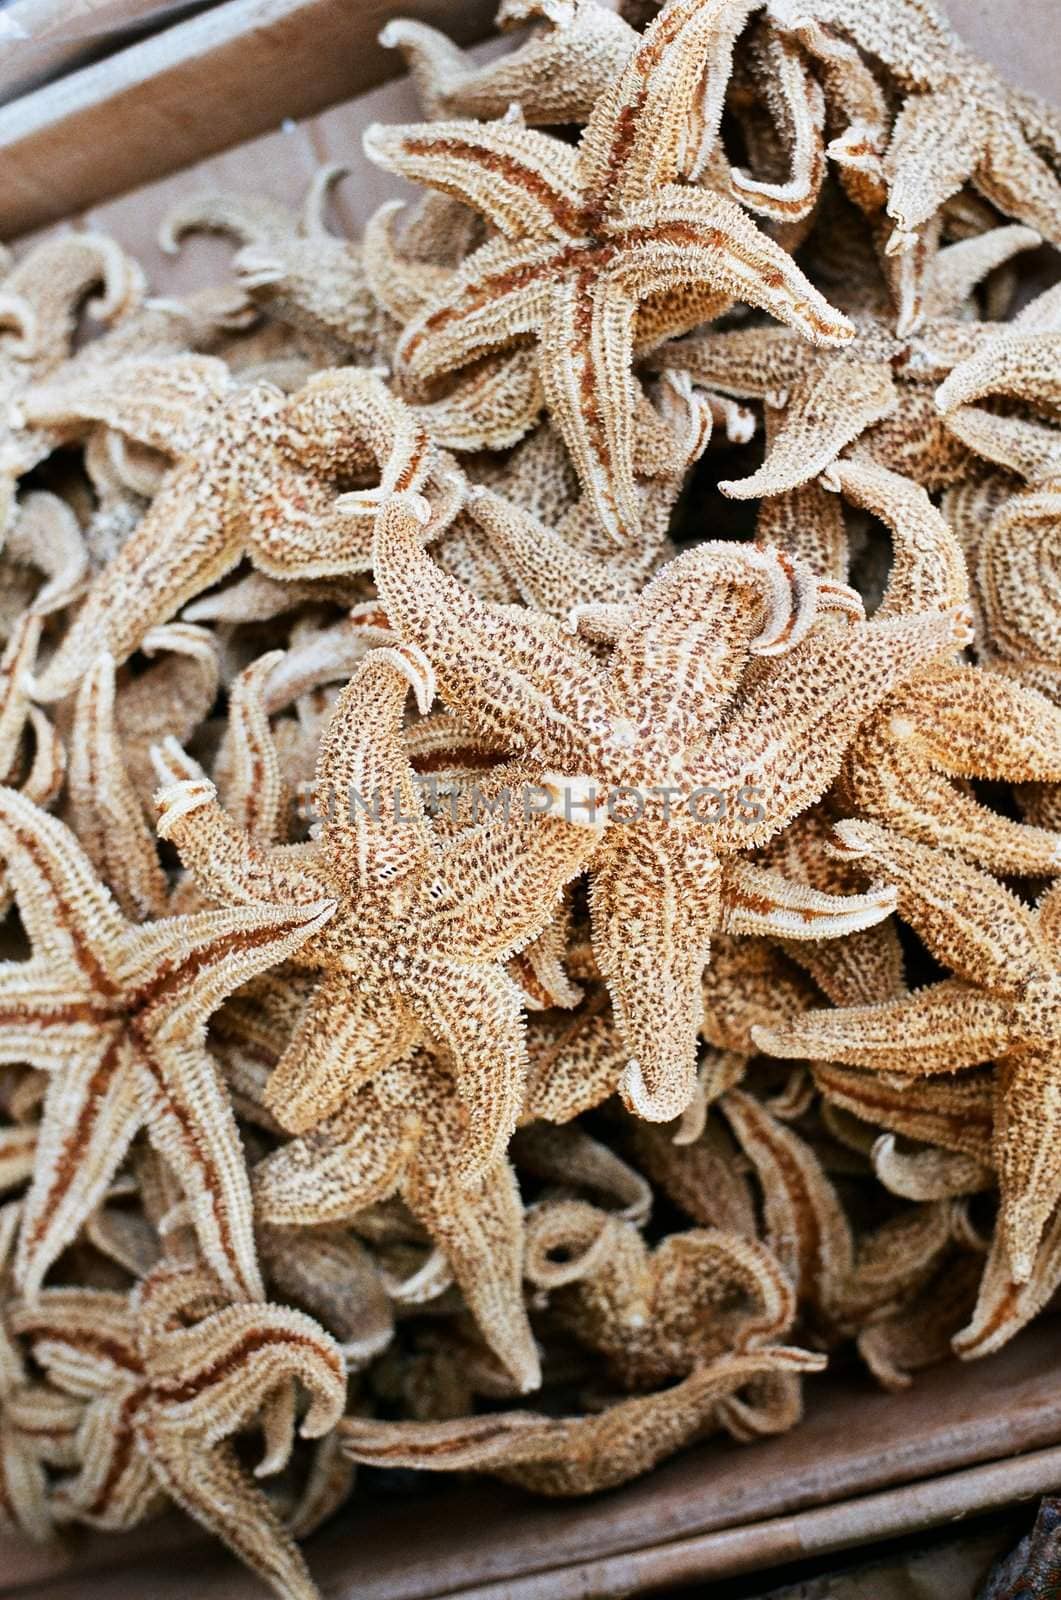 dried starfish that is used as chinese medicine, an exotic food